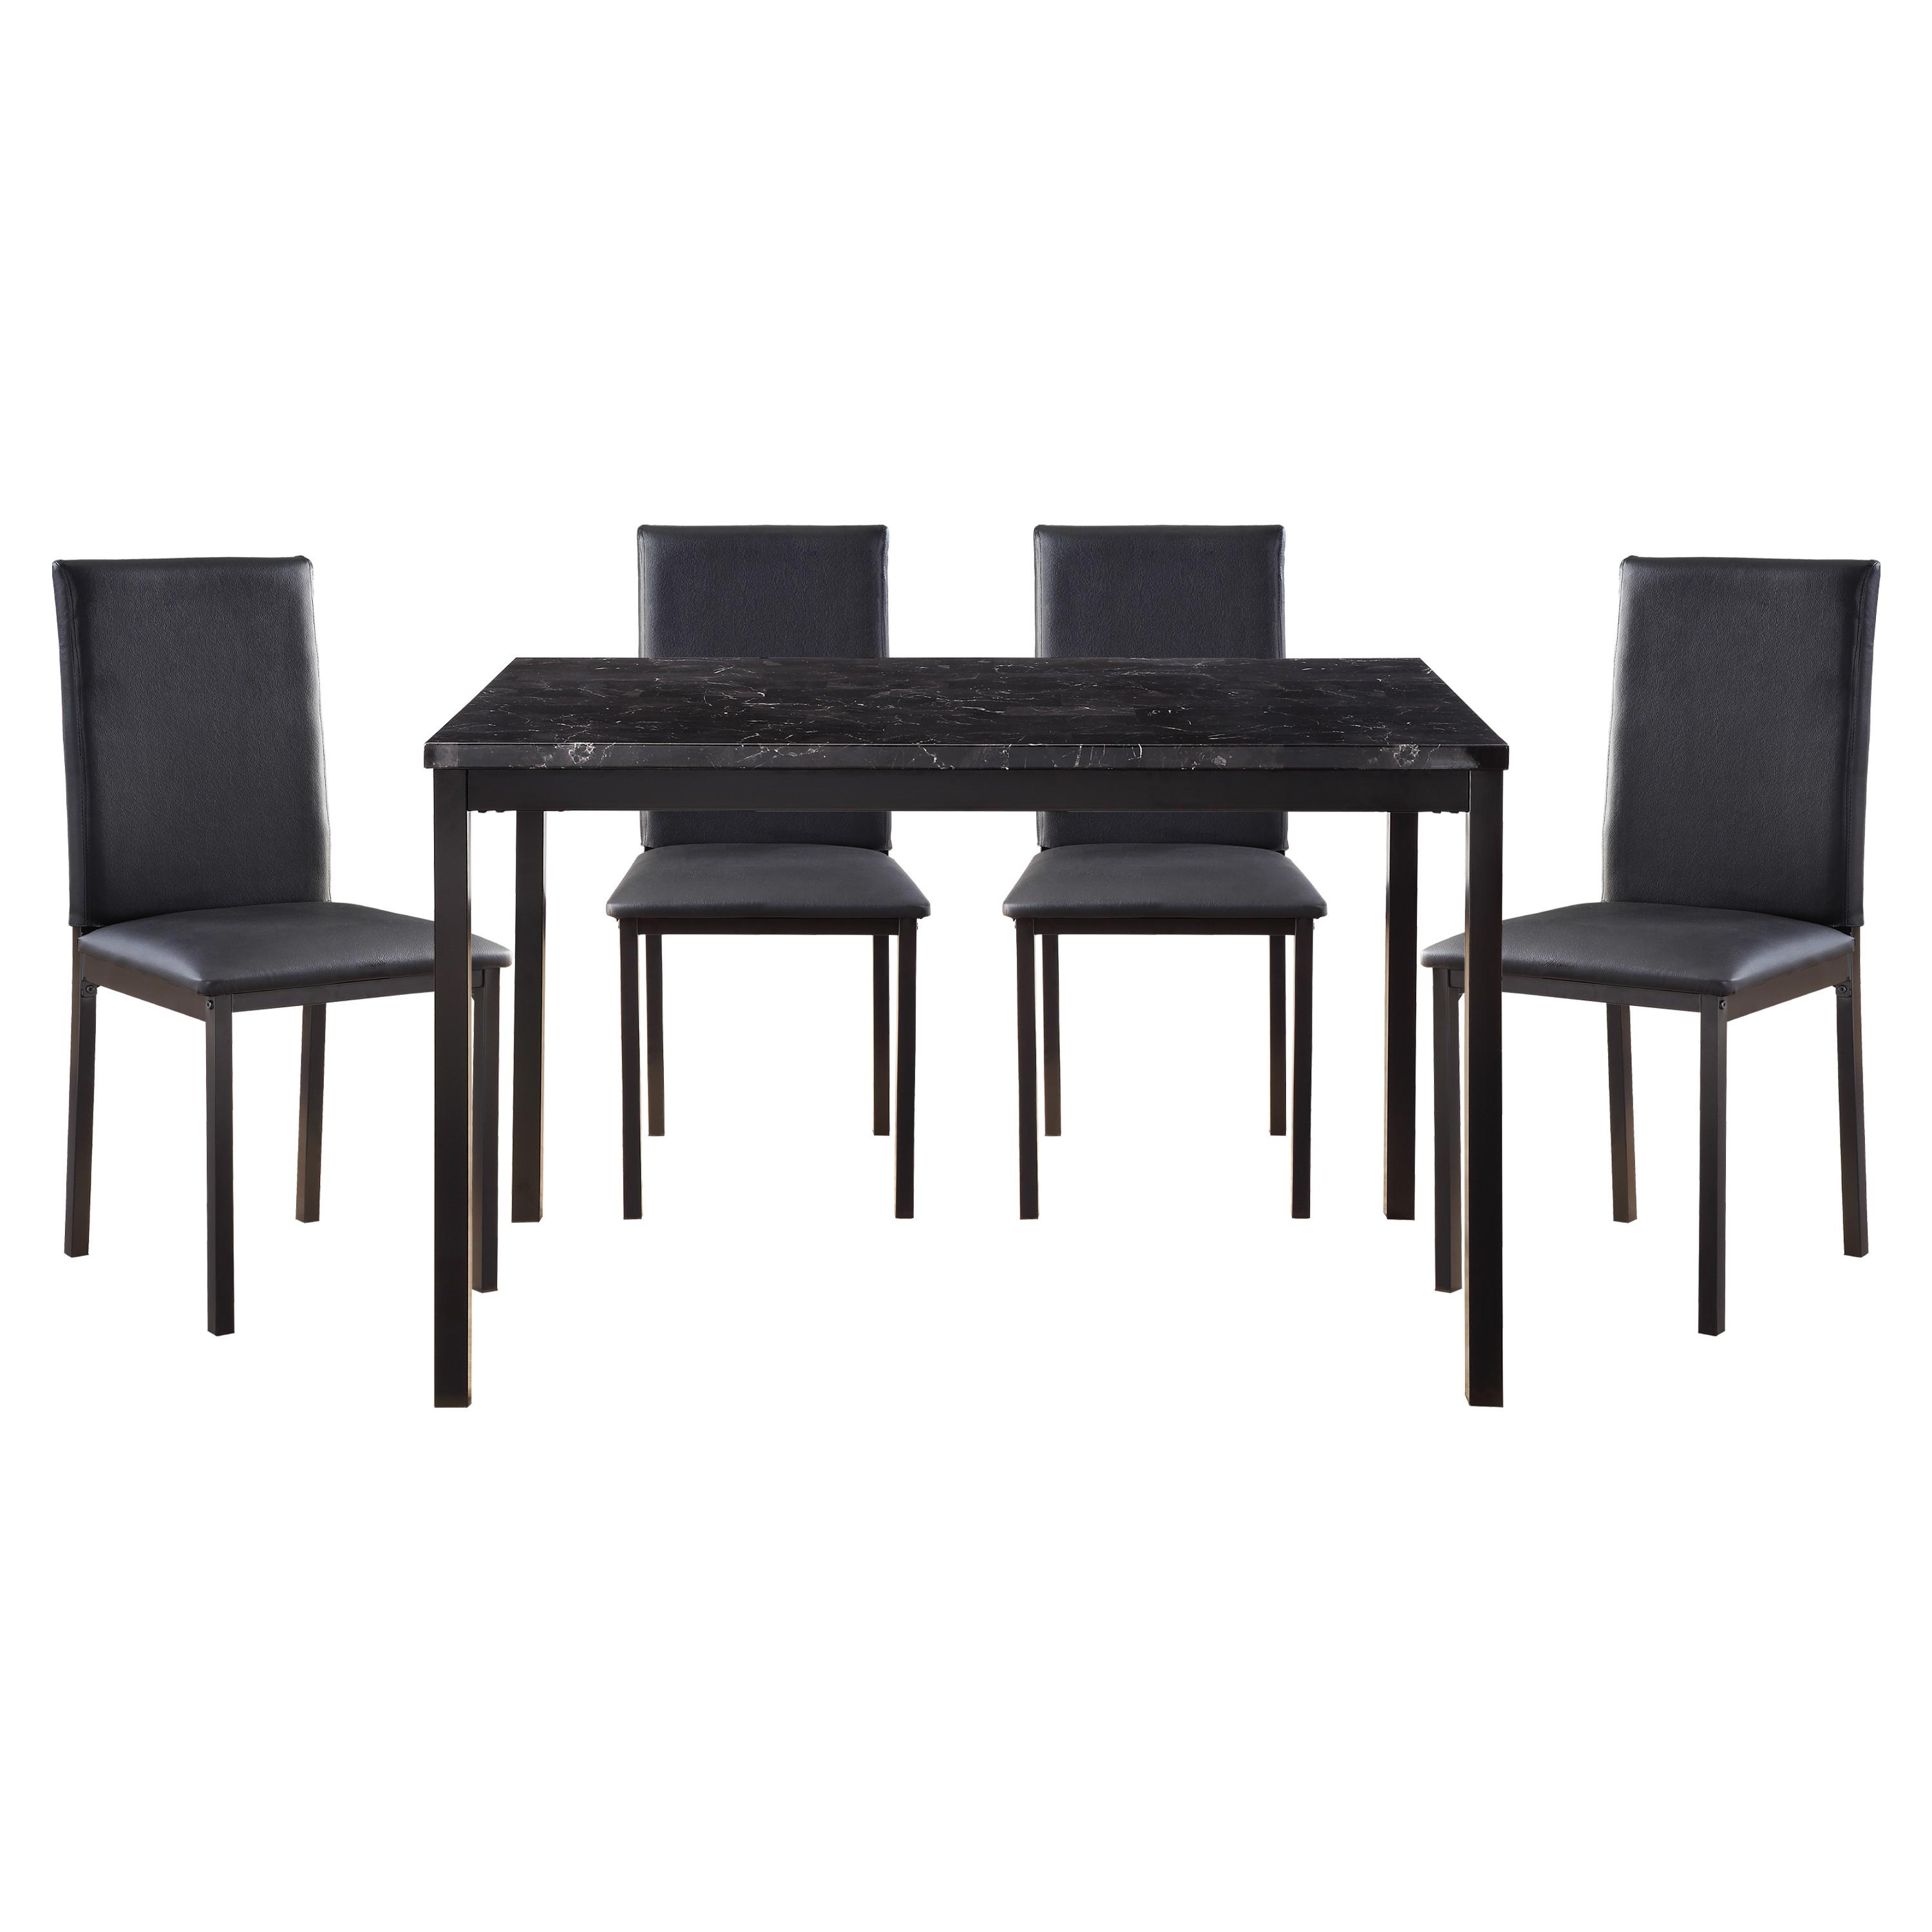 Transitional Dining Room Set 2601BK-48*5PC Tempe 2601BK-48*5PC in Black Faux Leather